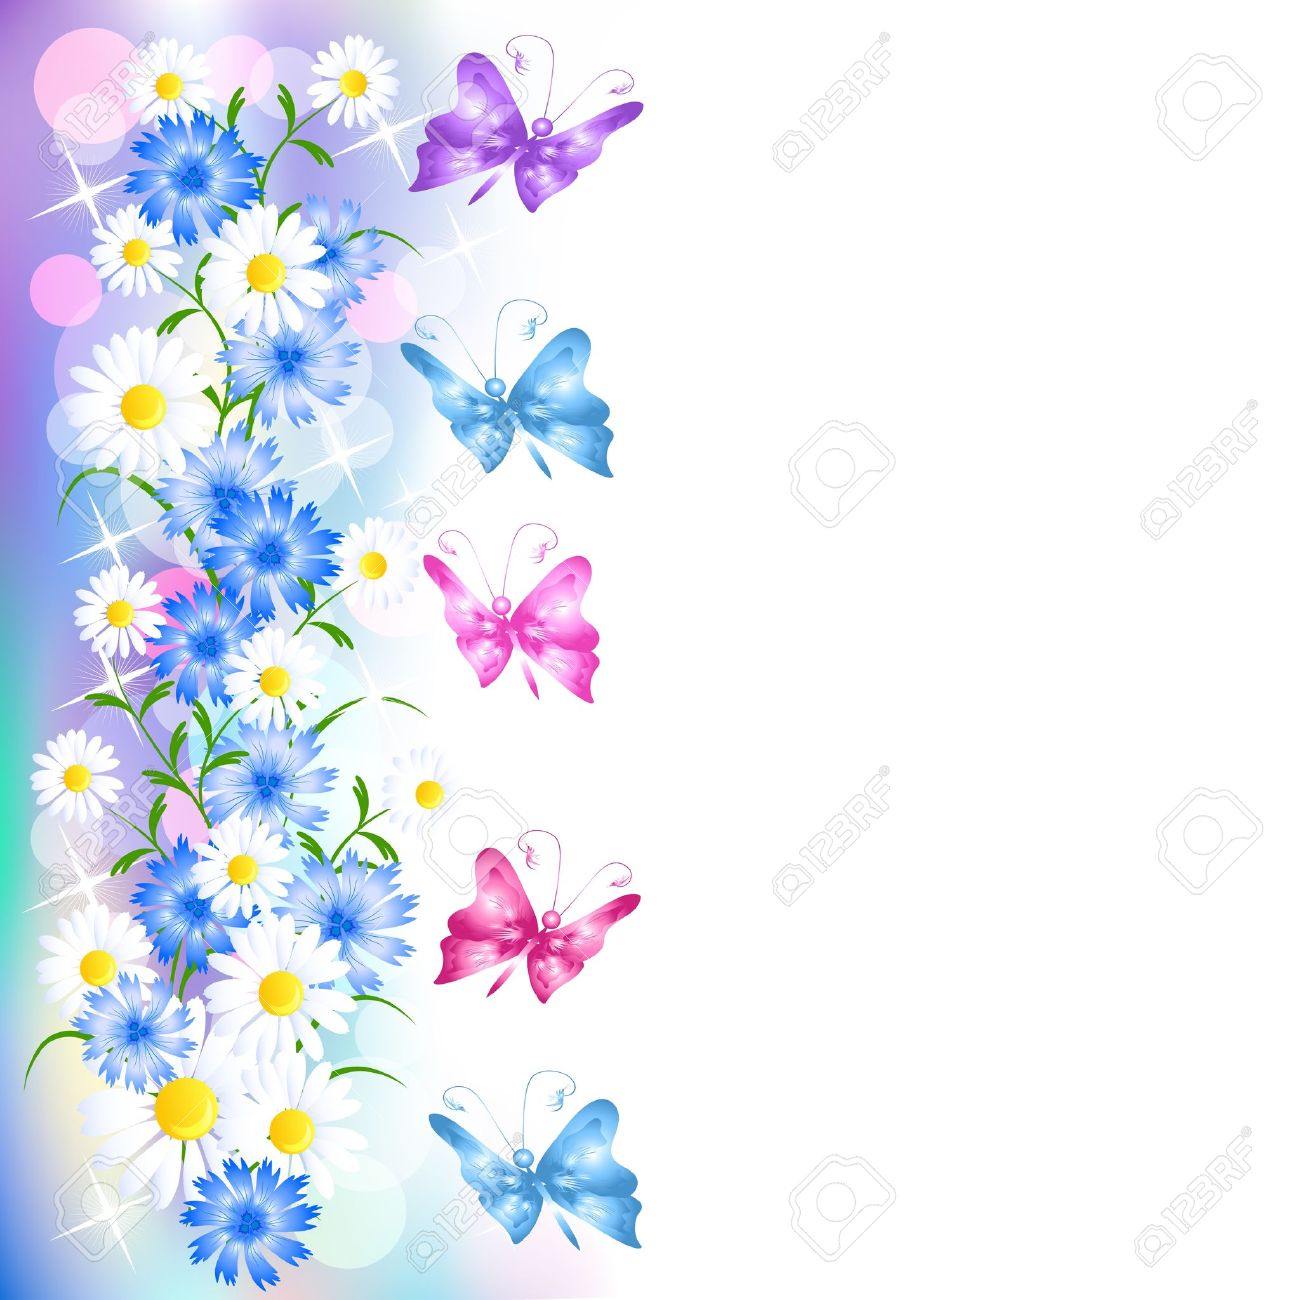 Clipart flowers and butterflies border